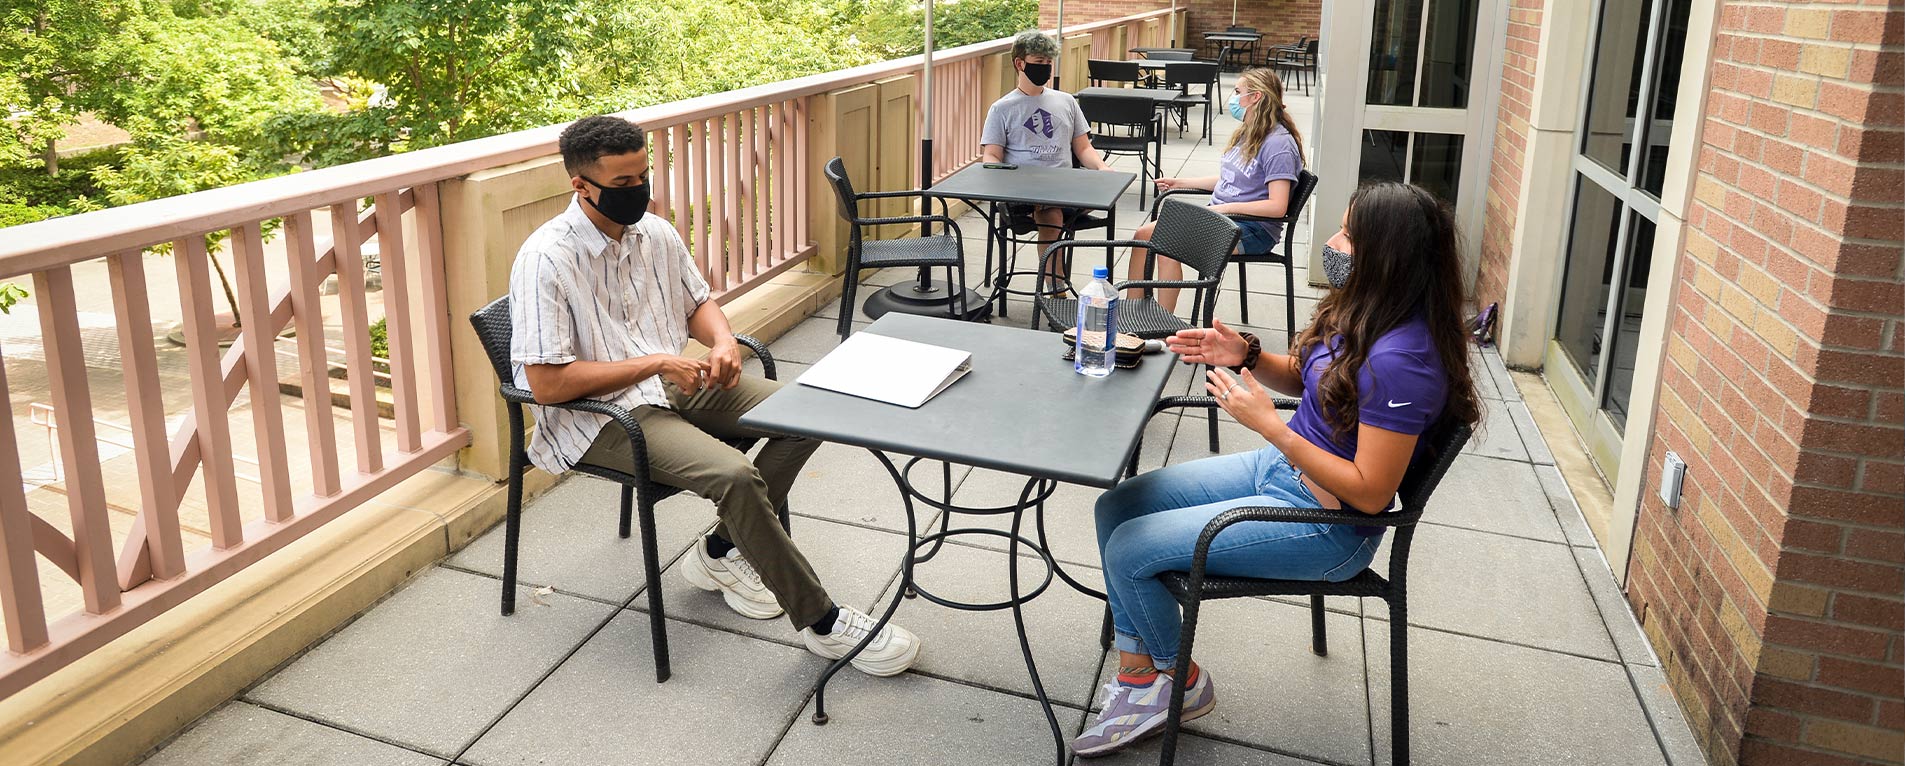 Students visit on the balcony overlooking the Baker Pattillo Student Center Plaza. Face coverings are required to be worn in public areas inside buildings and outside when maintaining a physical distance of at least 6 feet is not possible. Photo by Hardy Meredith